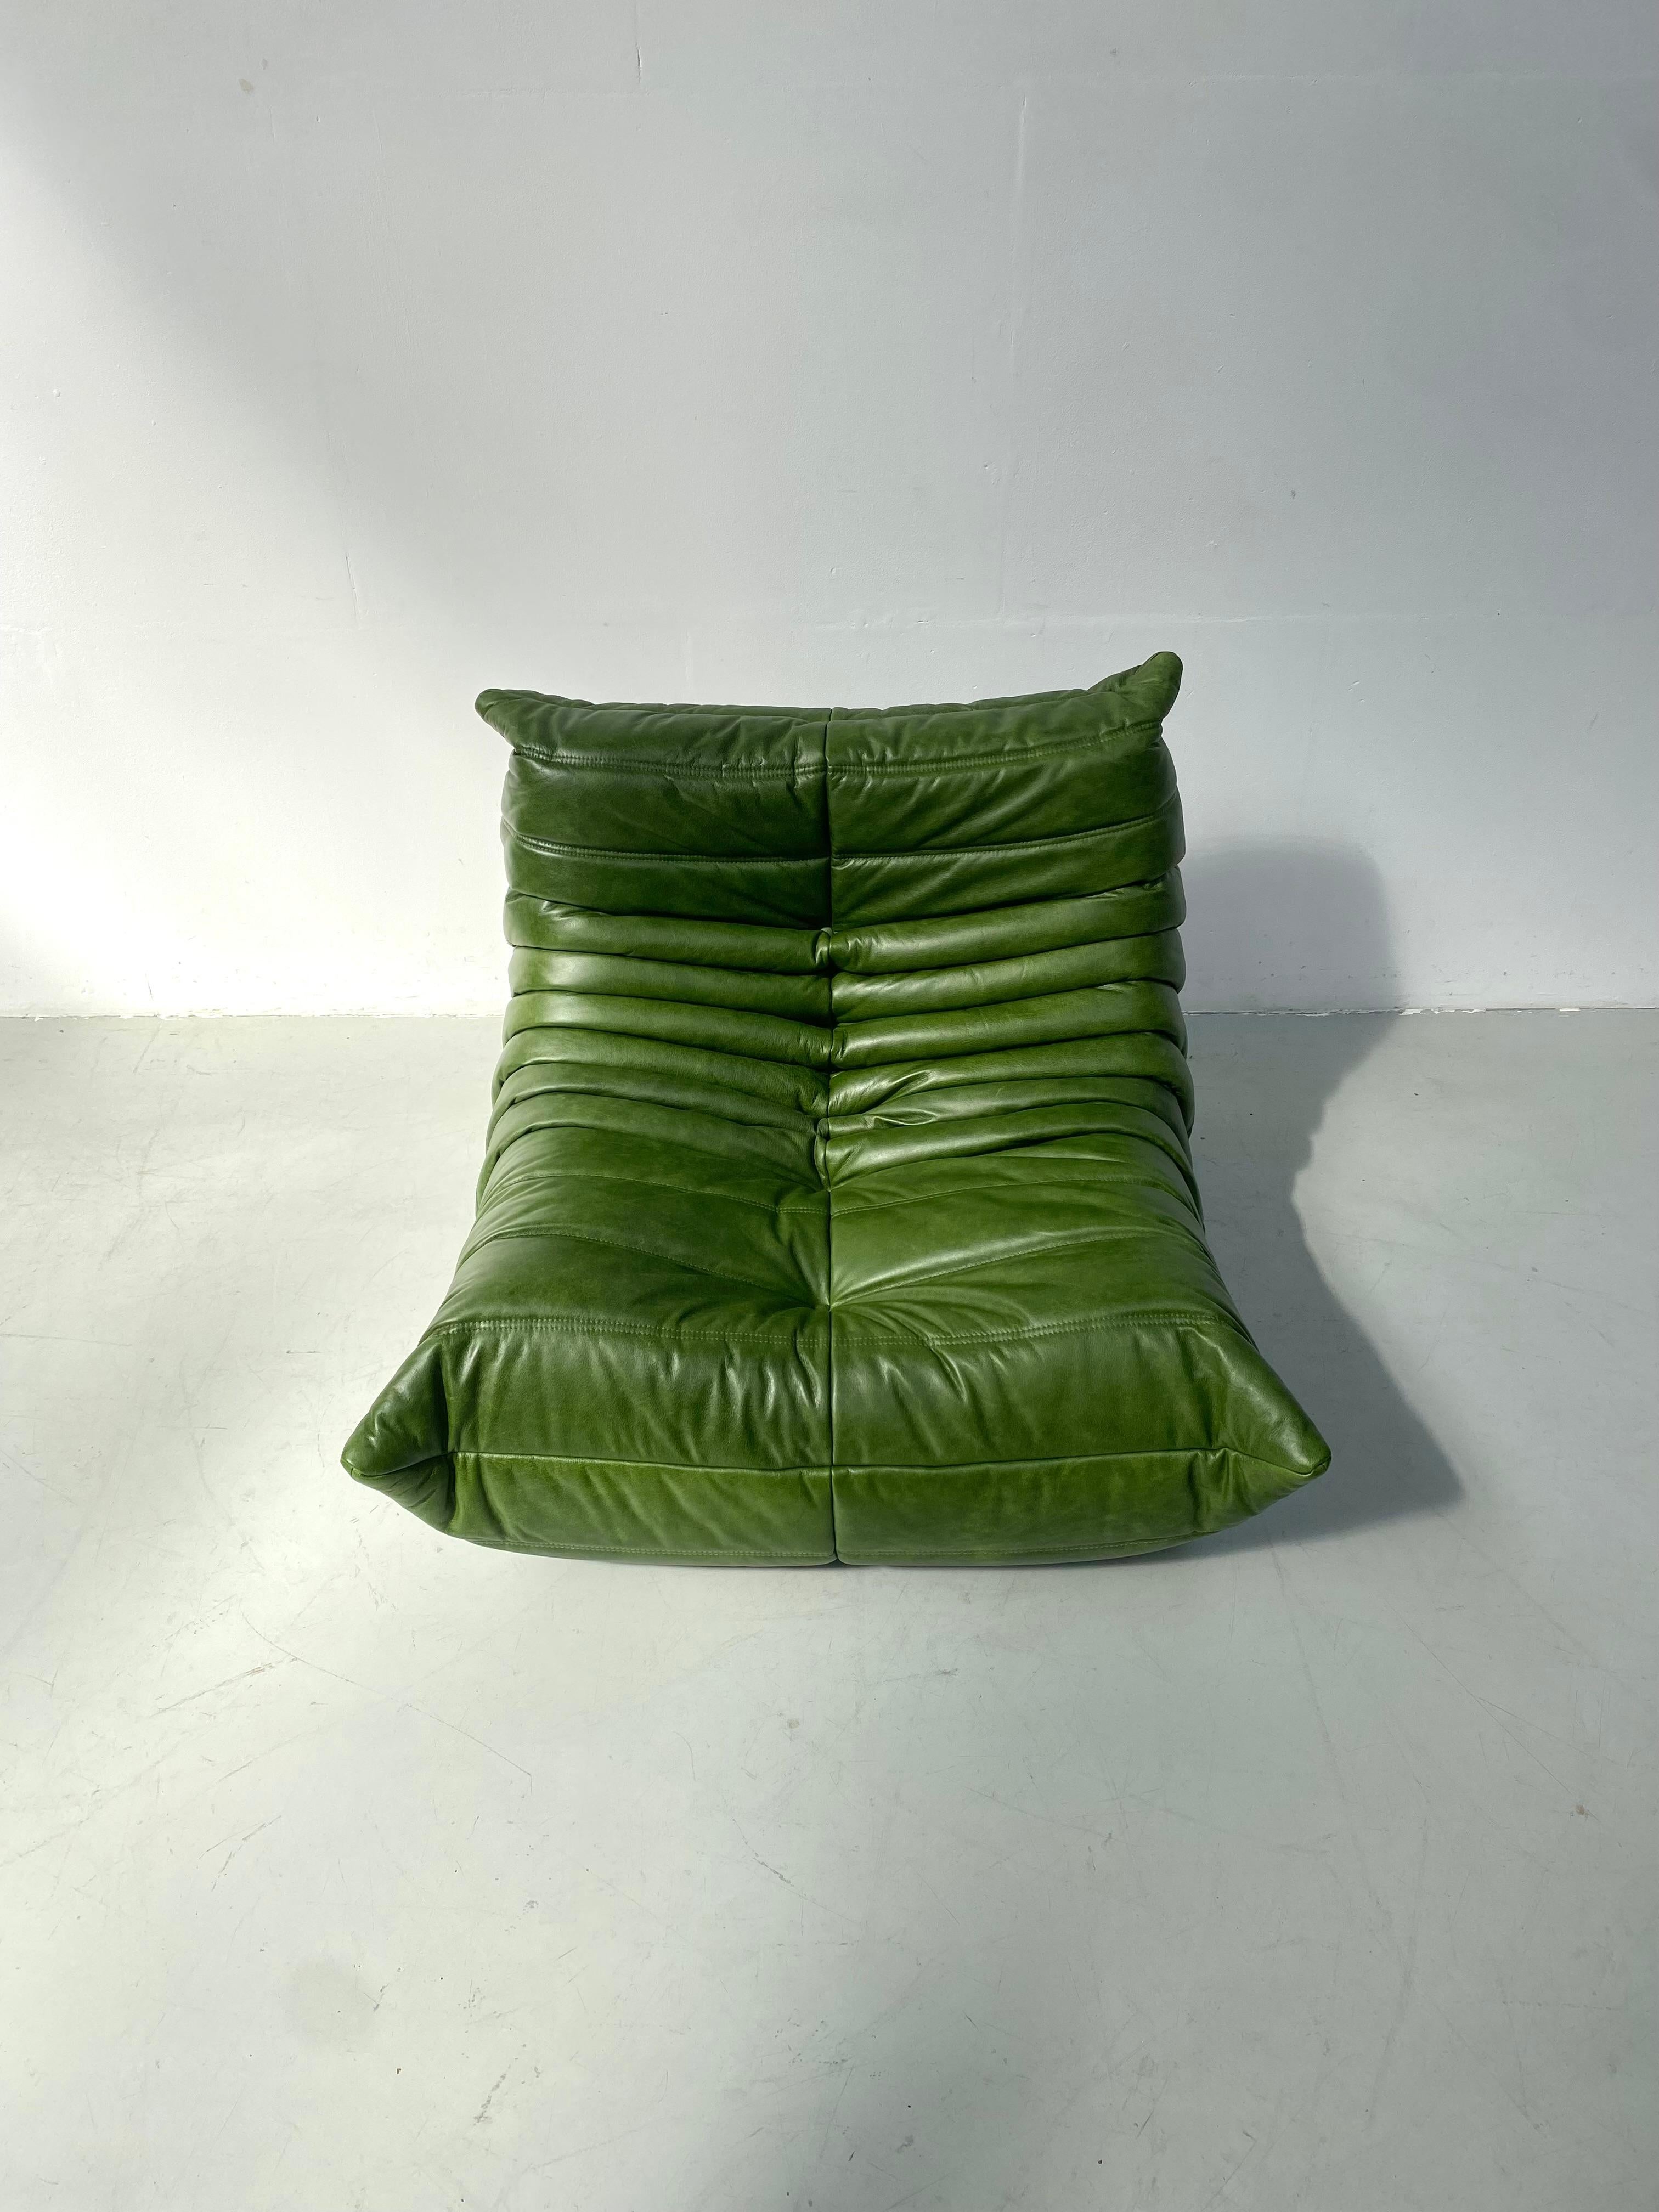 Mid-Century Modern French Togo Chair in Green Leather by Michel Ducaroy for Ligne Roset, 1974.